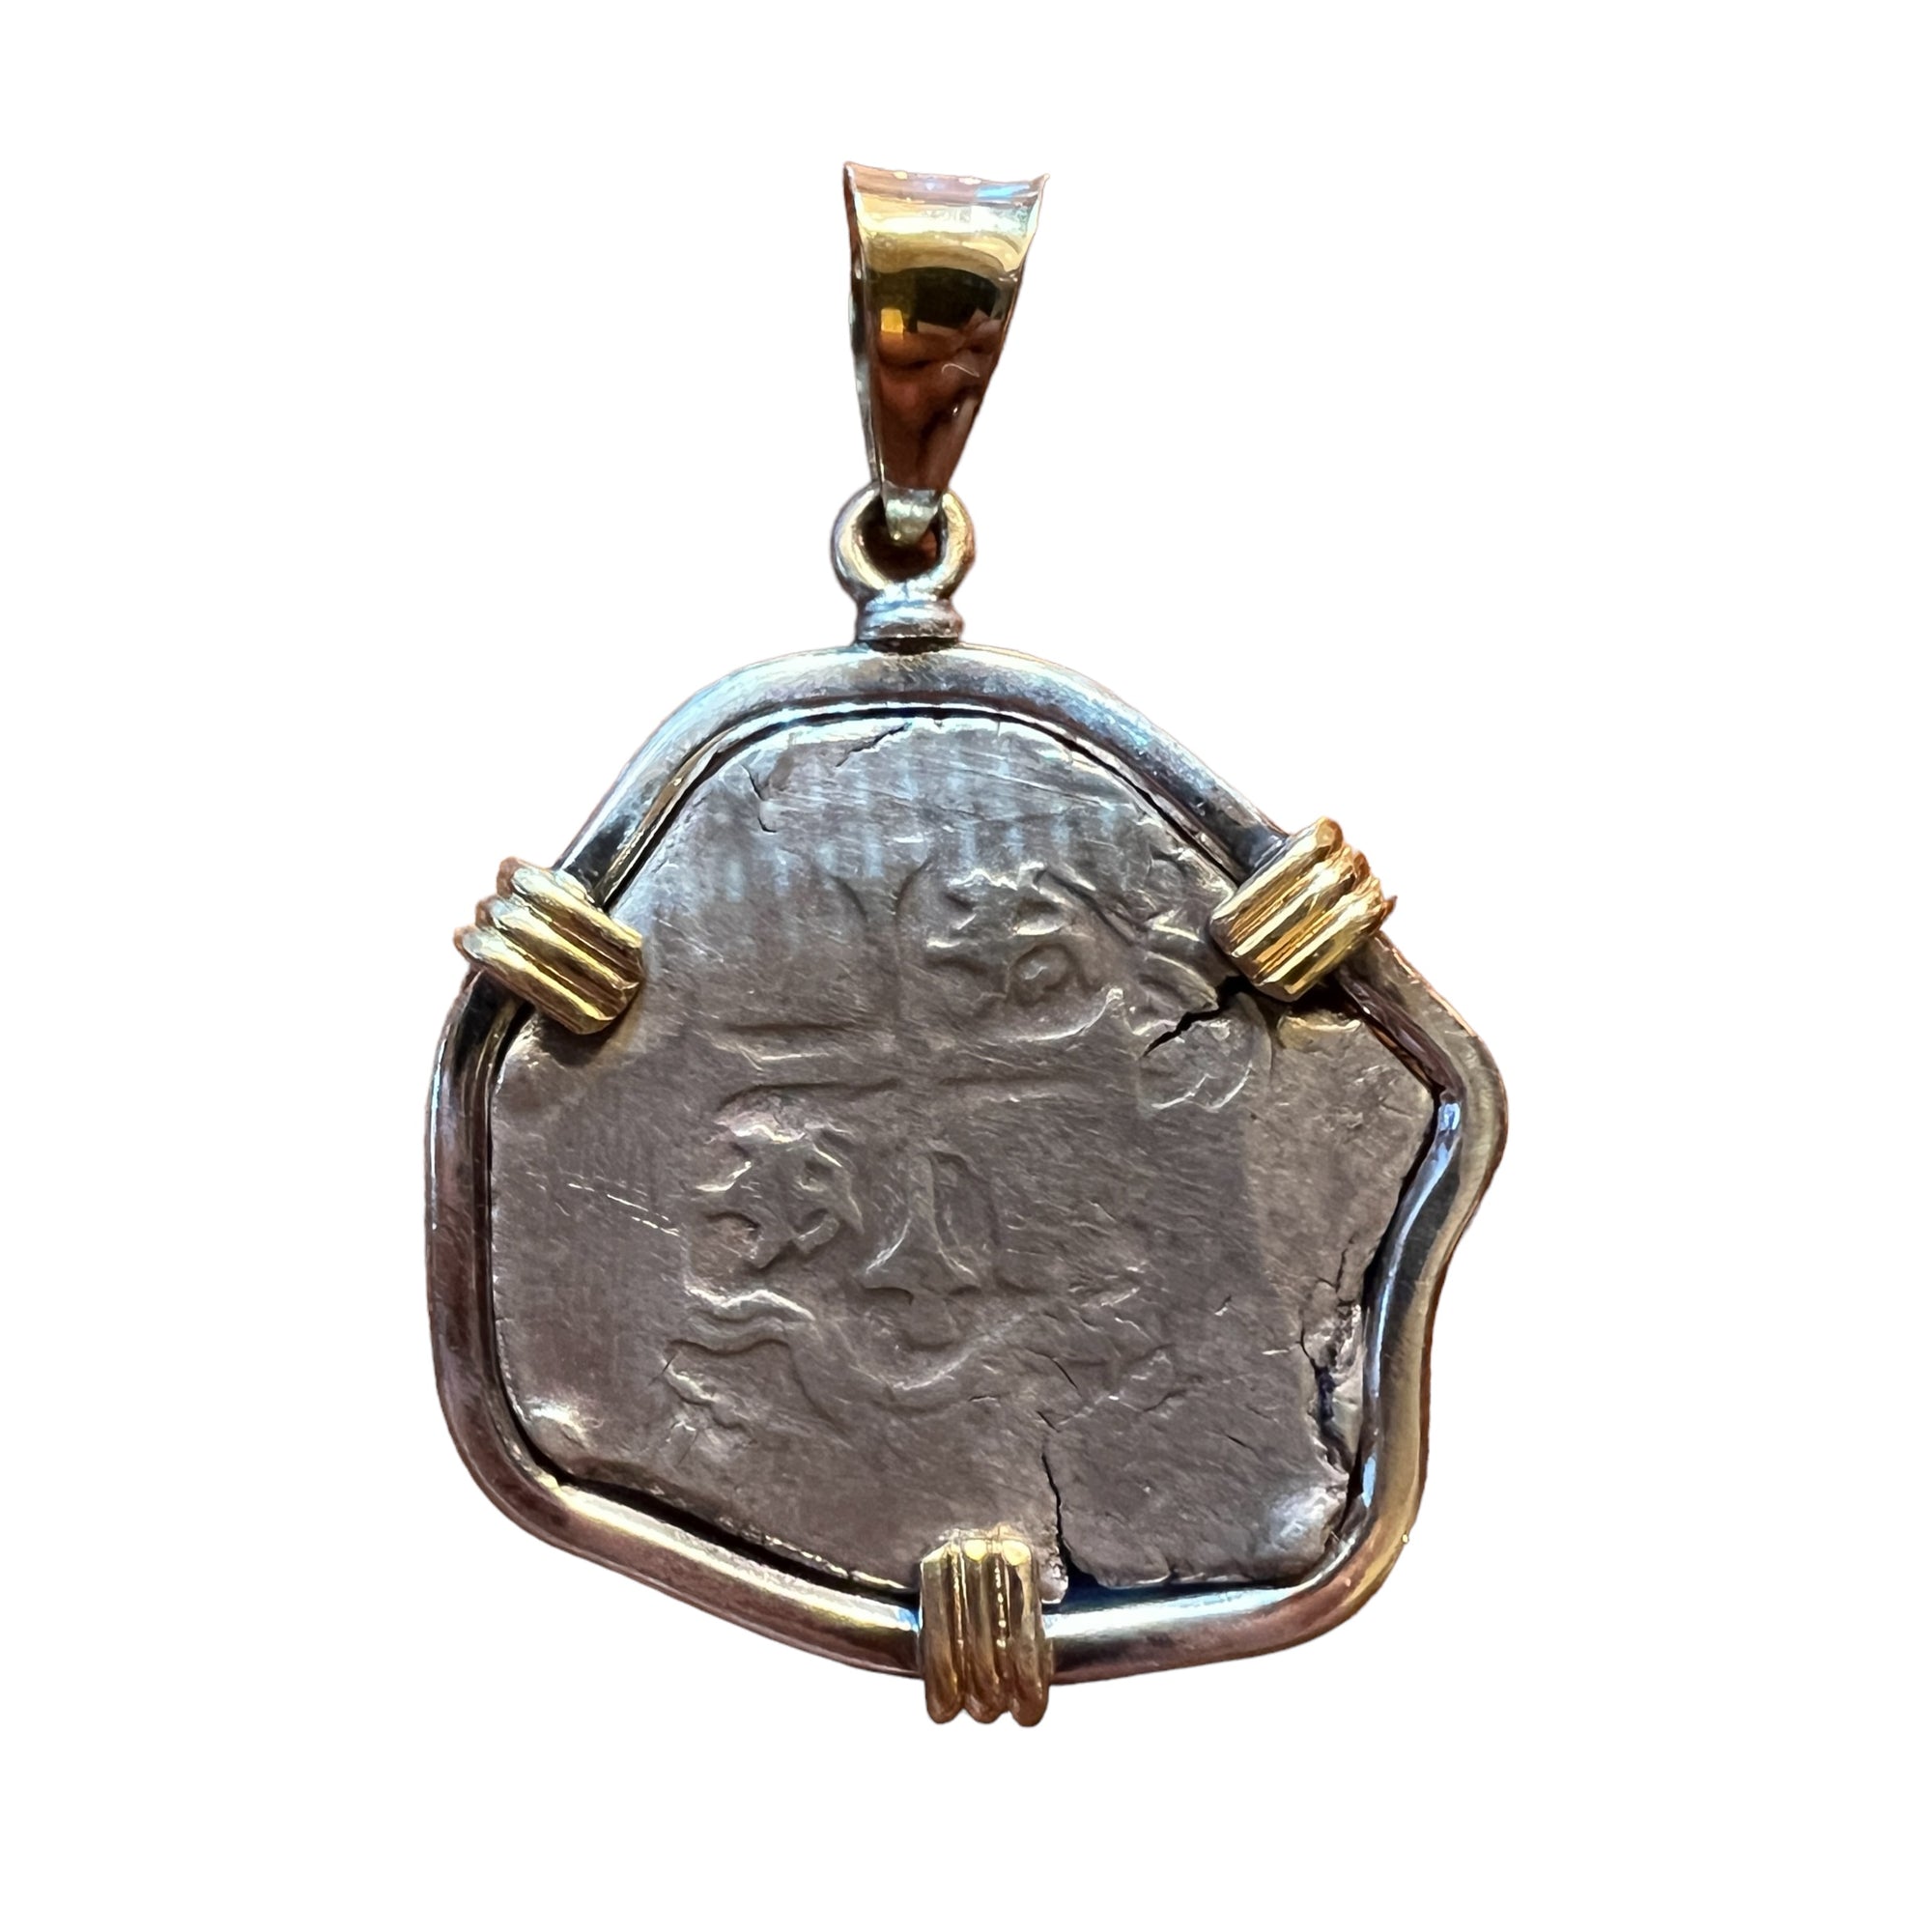 Private collection Spanish Cob - 4 Reales - Sterling Silver Mount w/ 18k Gold Prongs and bale